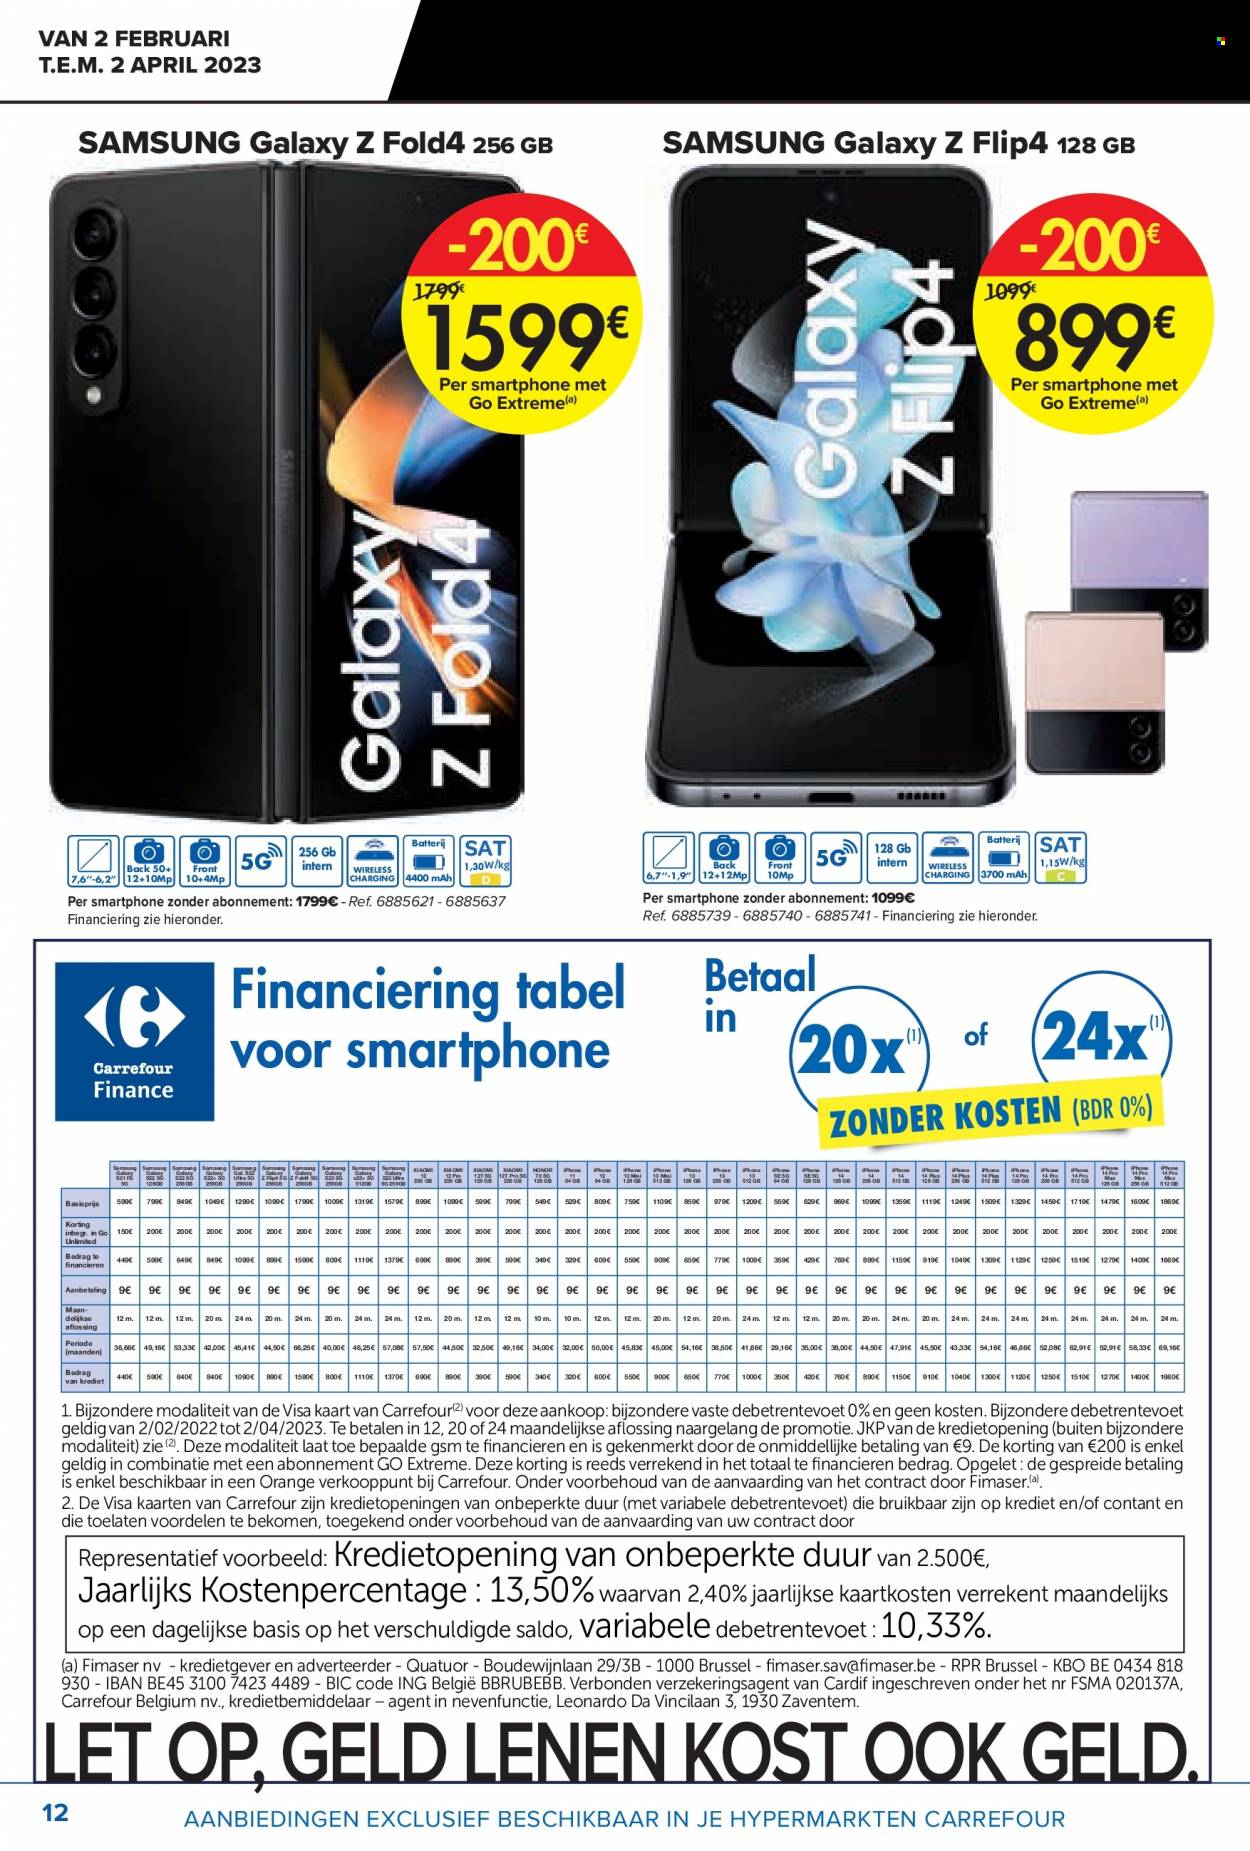 Catalogue Carrefour hypermarkt - 2.2.2023 - 2.4.2023. Page 12.